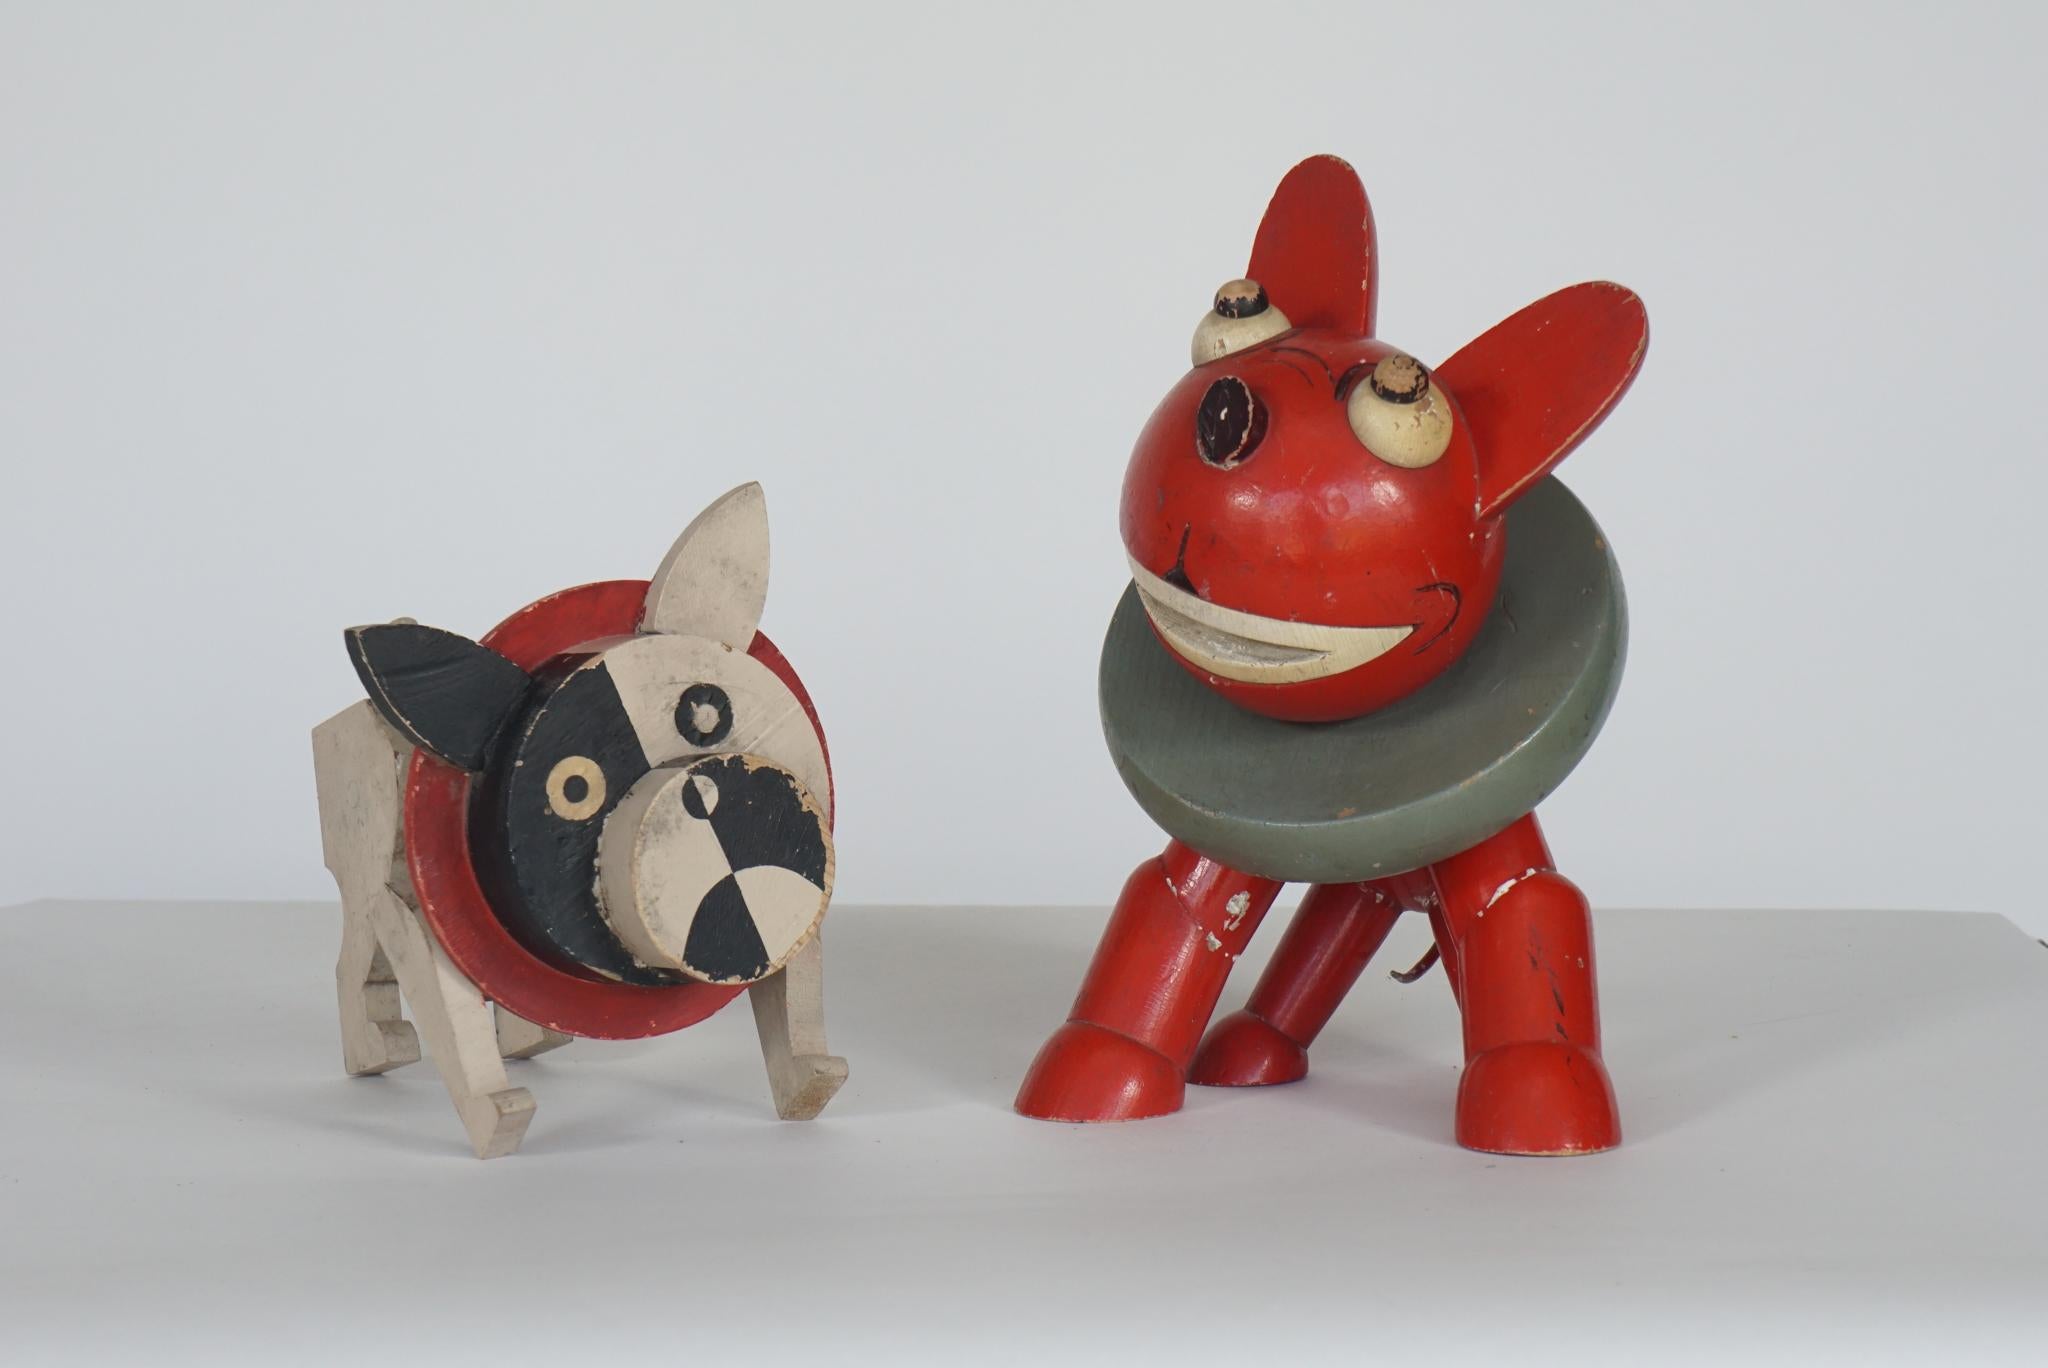 Wonderfully crafted collection of 5 painted toy dogs. Each one handcrafted and painted in a style reminiscent of the 1930s or 1940s round geometric designs with movable parts
A set of 5 but each 